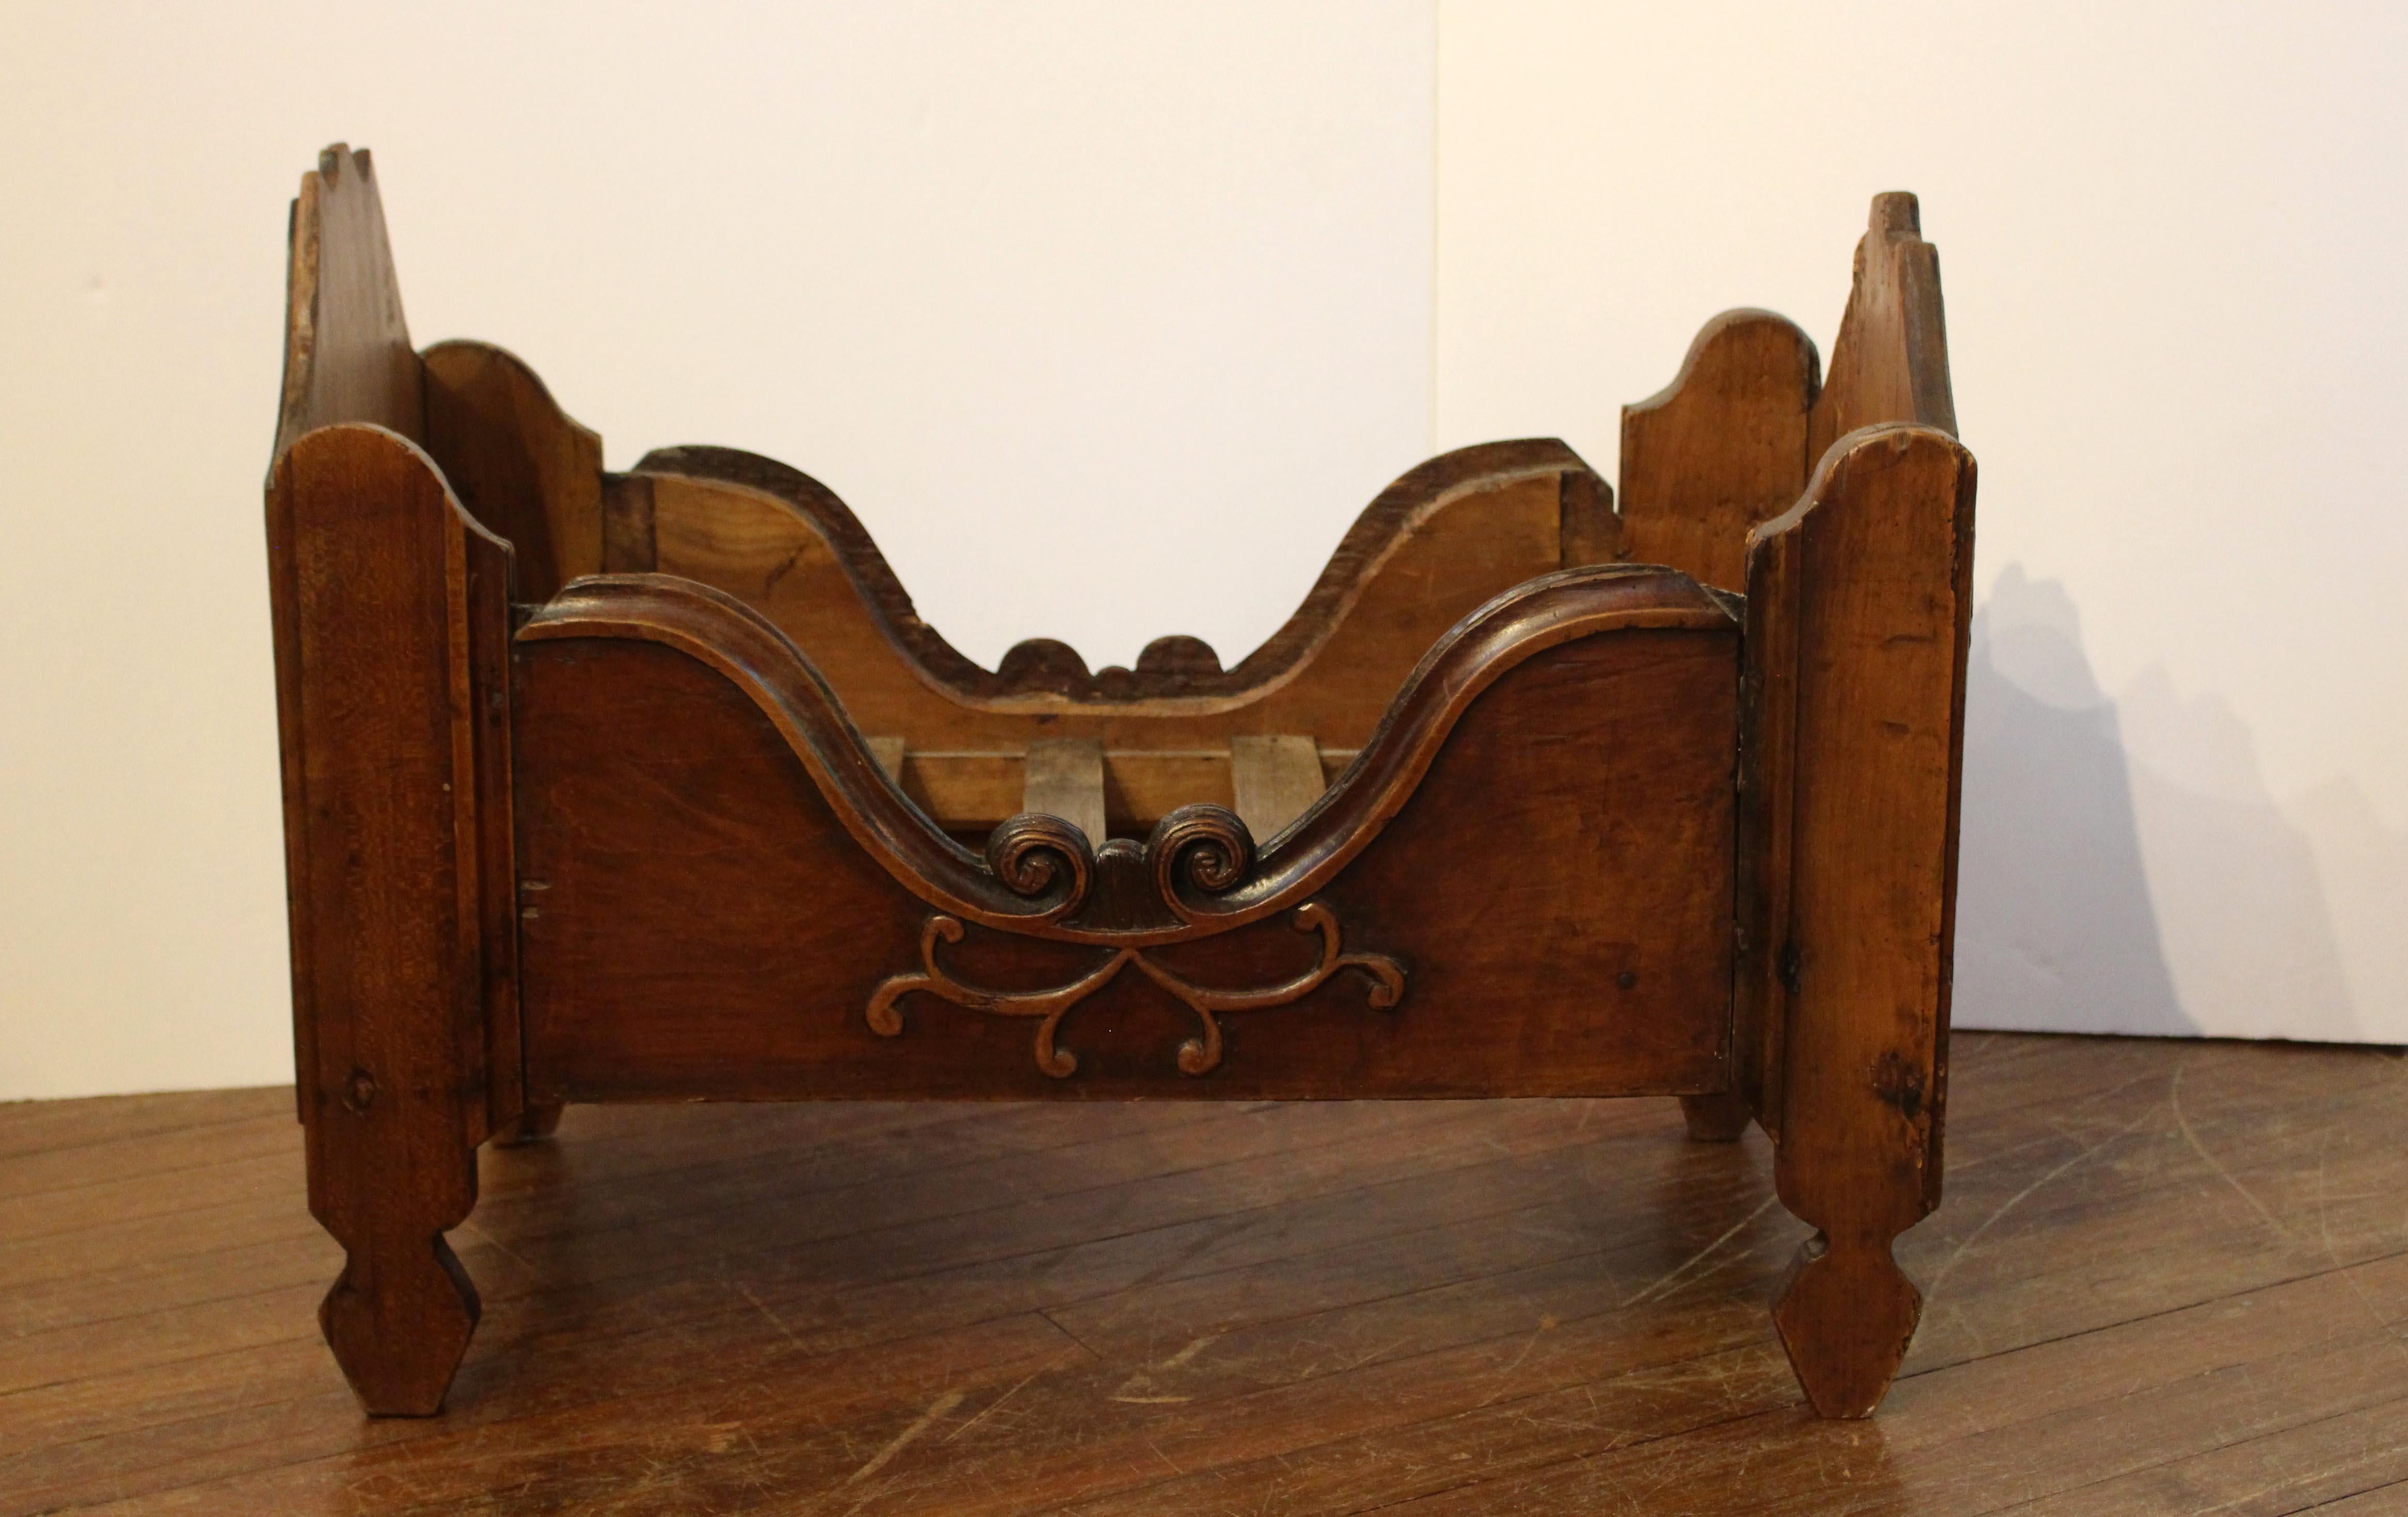 Late 19th-early 19th century country French Directoire period infant's bed. Ideal for a doll collection or beloved mini-canine or cat. Fruitwood. Nicely molded throughout. The sides with tendril carving and extensive whorl design decoration. The